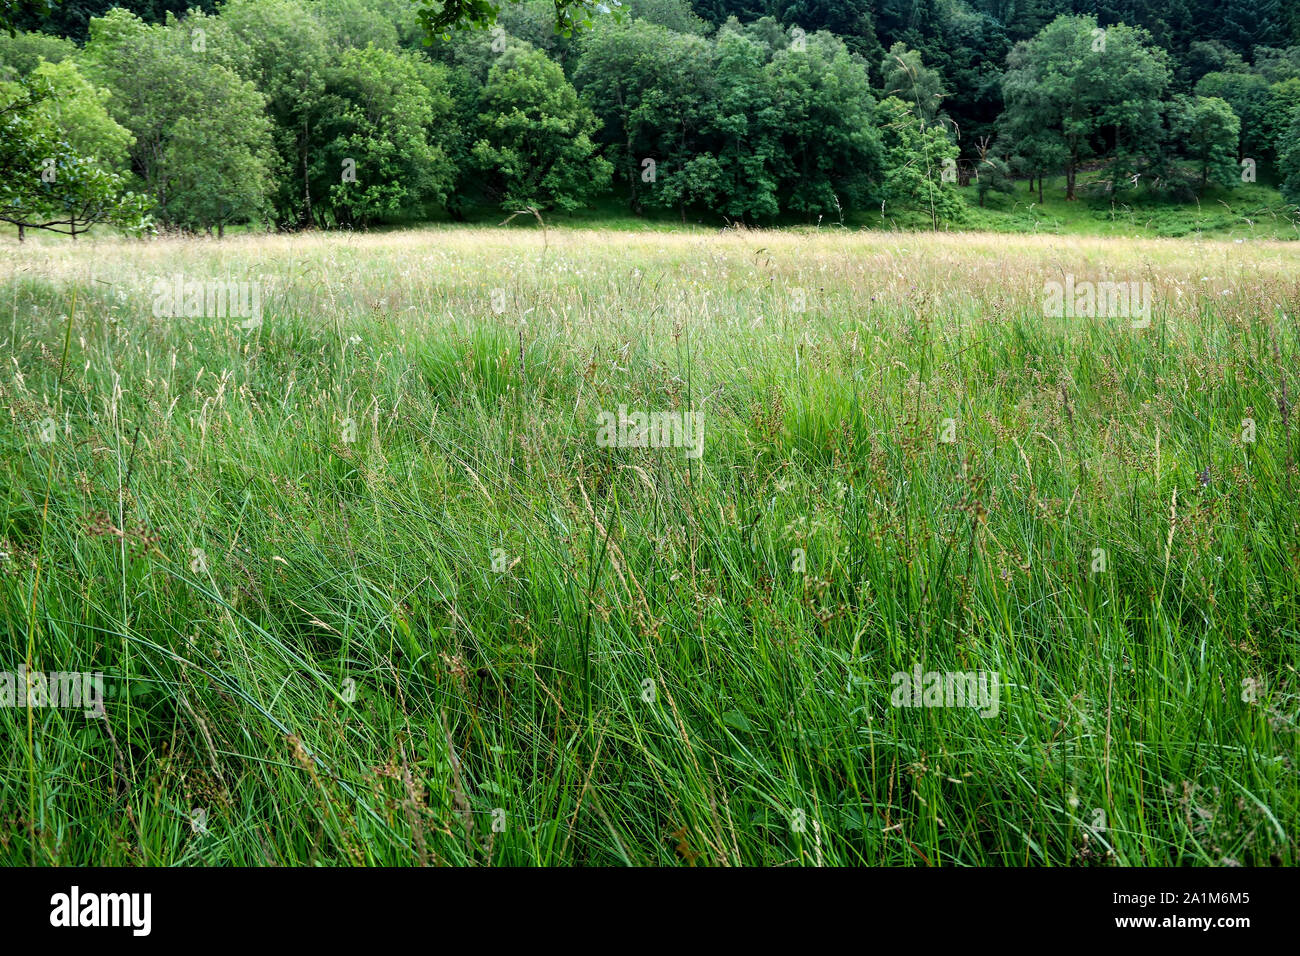 Woodland and overgrown grass field in Scottish Highlands Stock Photo